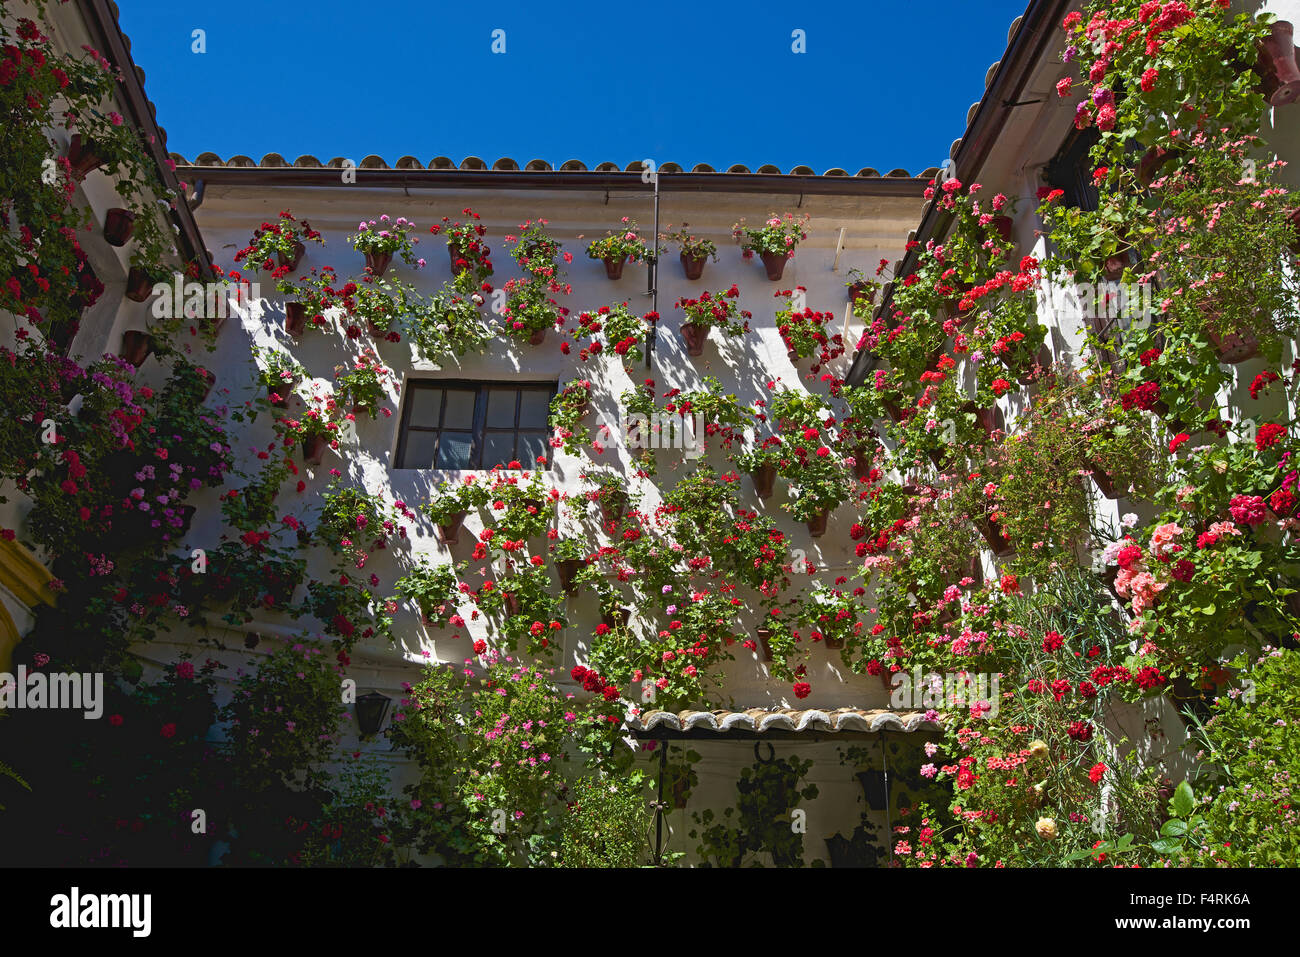 Andalusia, Spain, Europe, outside, day, Cordoba, Fiesta de los patios, tradition, traditional, floral decoration, flower, nobody Stock Photo